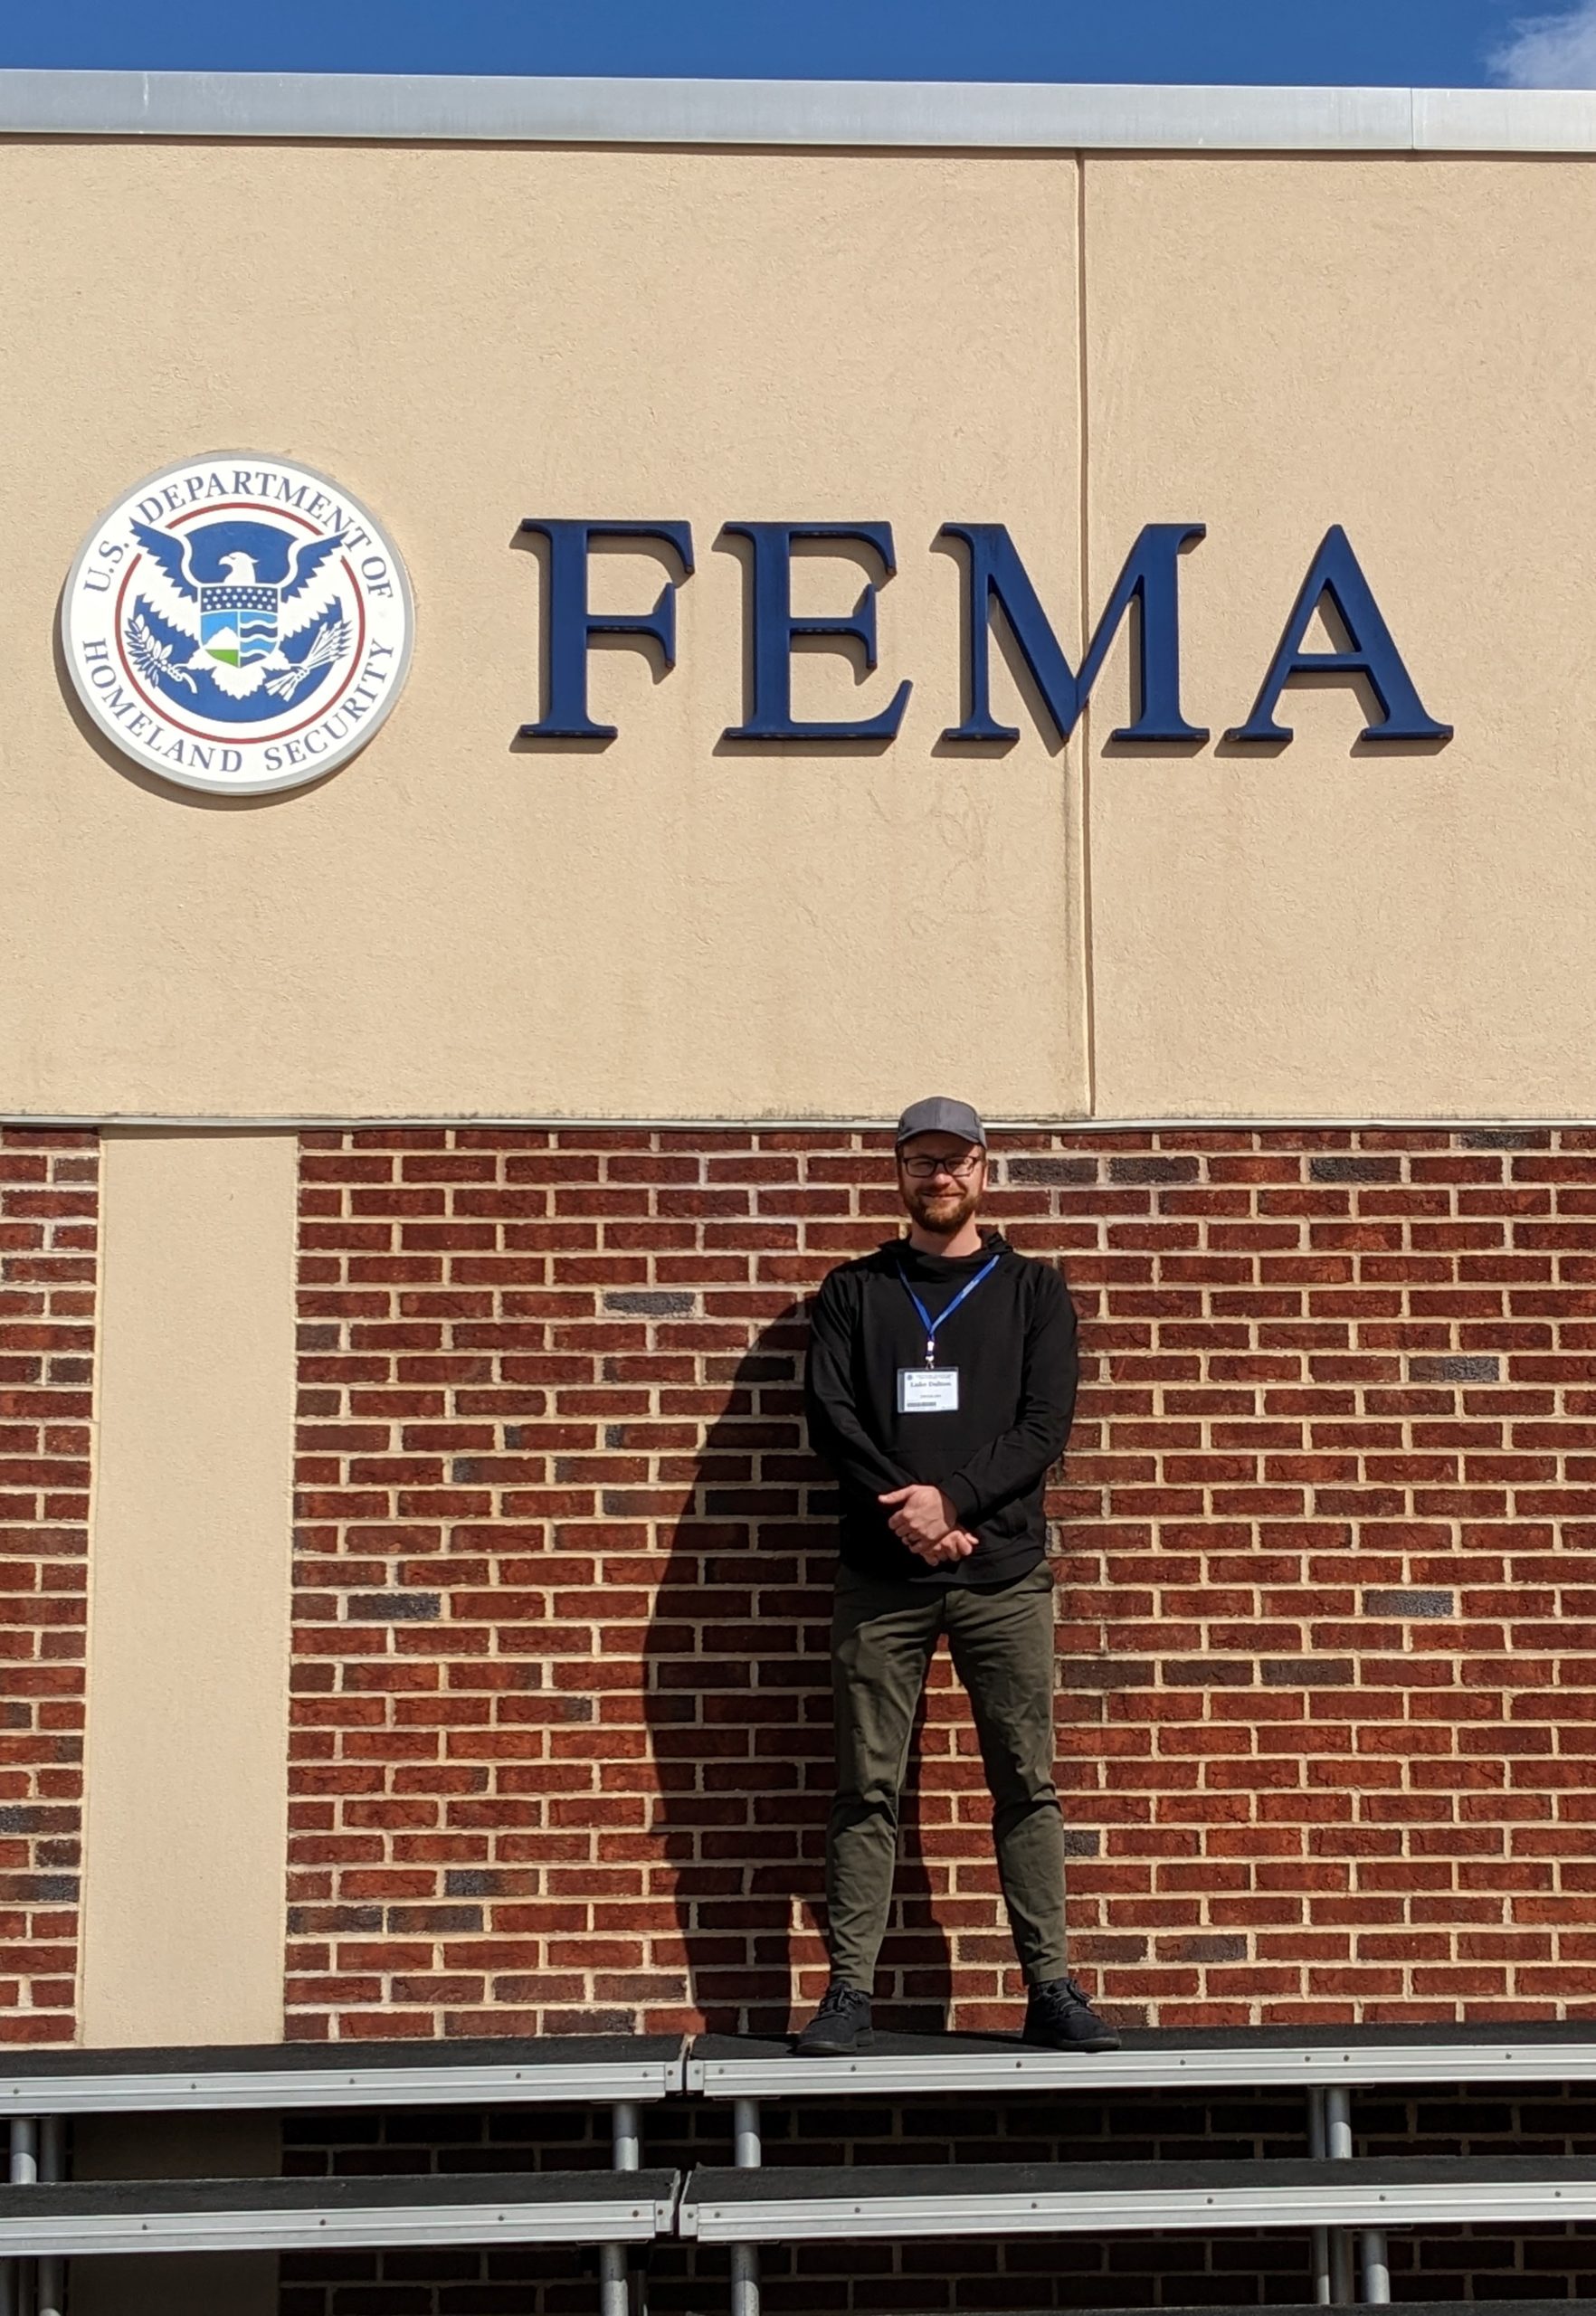 “I had the opportunity to attend FEMA’s Center for Domestic Preparedness (CDP) Environmental Health Training in Emergency Response Operations (EHTER-Ops) training at their facilities in Anniston, AL. As a result, I got to respond to a simulated county-wide flood disaster, conduct a well water assessment and a building reoccupation assessment, and make recommendations to the Public Health Branch Director. I had the privilege of meeting some incredible people from around the country. In addition, the environment that the CDP constructed for the exercises was incredibly realistic, which made for a memorable experience.”  Luke Dalton - CSTE AEF Class 20 Fellow